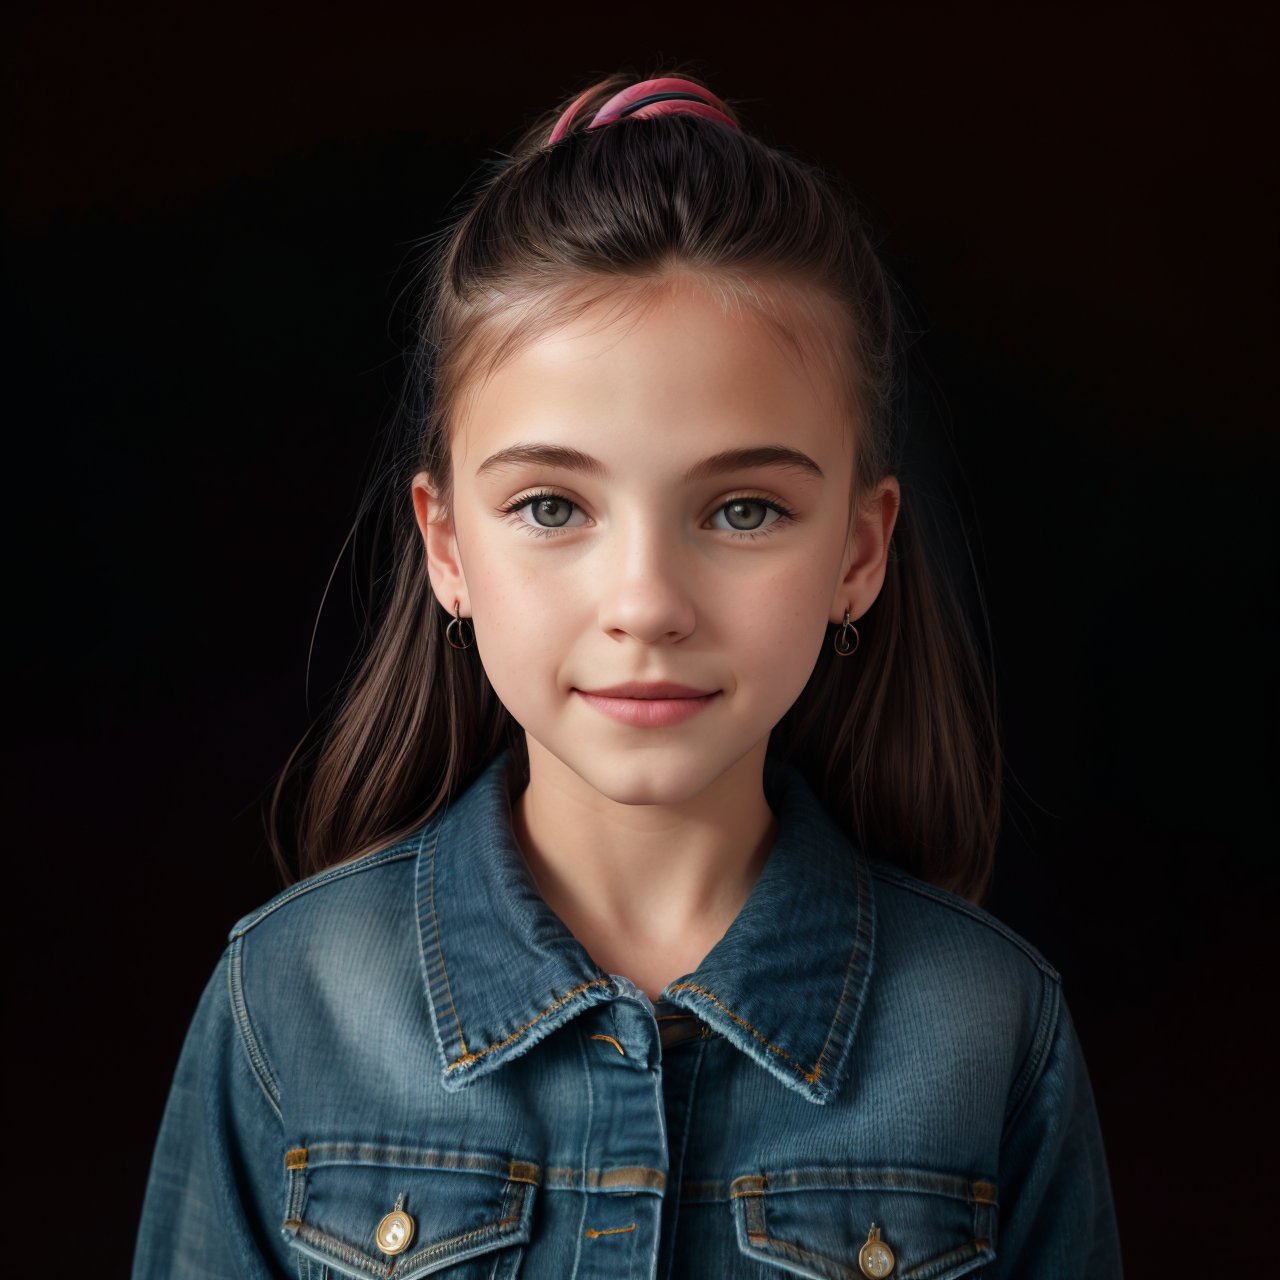 (masterpiece:1.3), extra resolution, view from below, close up portrait of cute (AIDA_LoRA_arusso:1.03) <lora:AIDA_LoRA_arusso:0.68> as little girl in a denim jacket and jeans, pretty face, naughty, funny, happy, playful, intimate, dramatic, studio photo, studio photo, kkw-ph1, hdr, f1.7, getty images, (colorful:1.1), (black background:1.5)